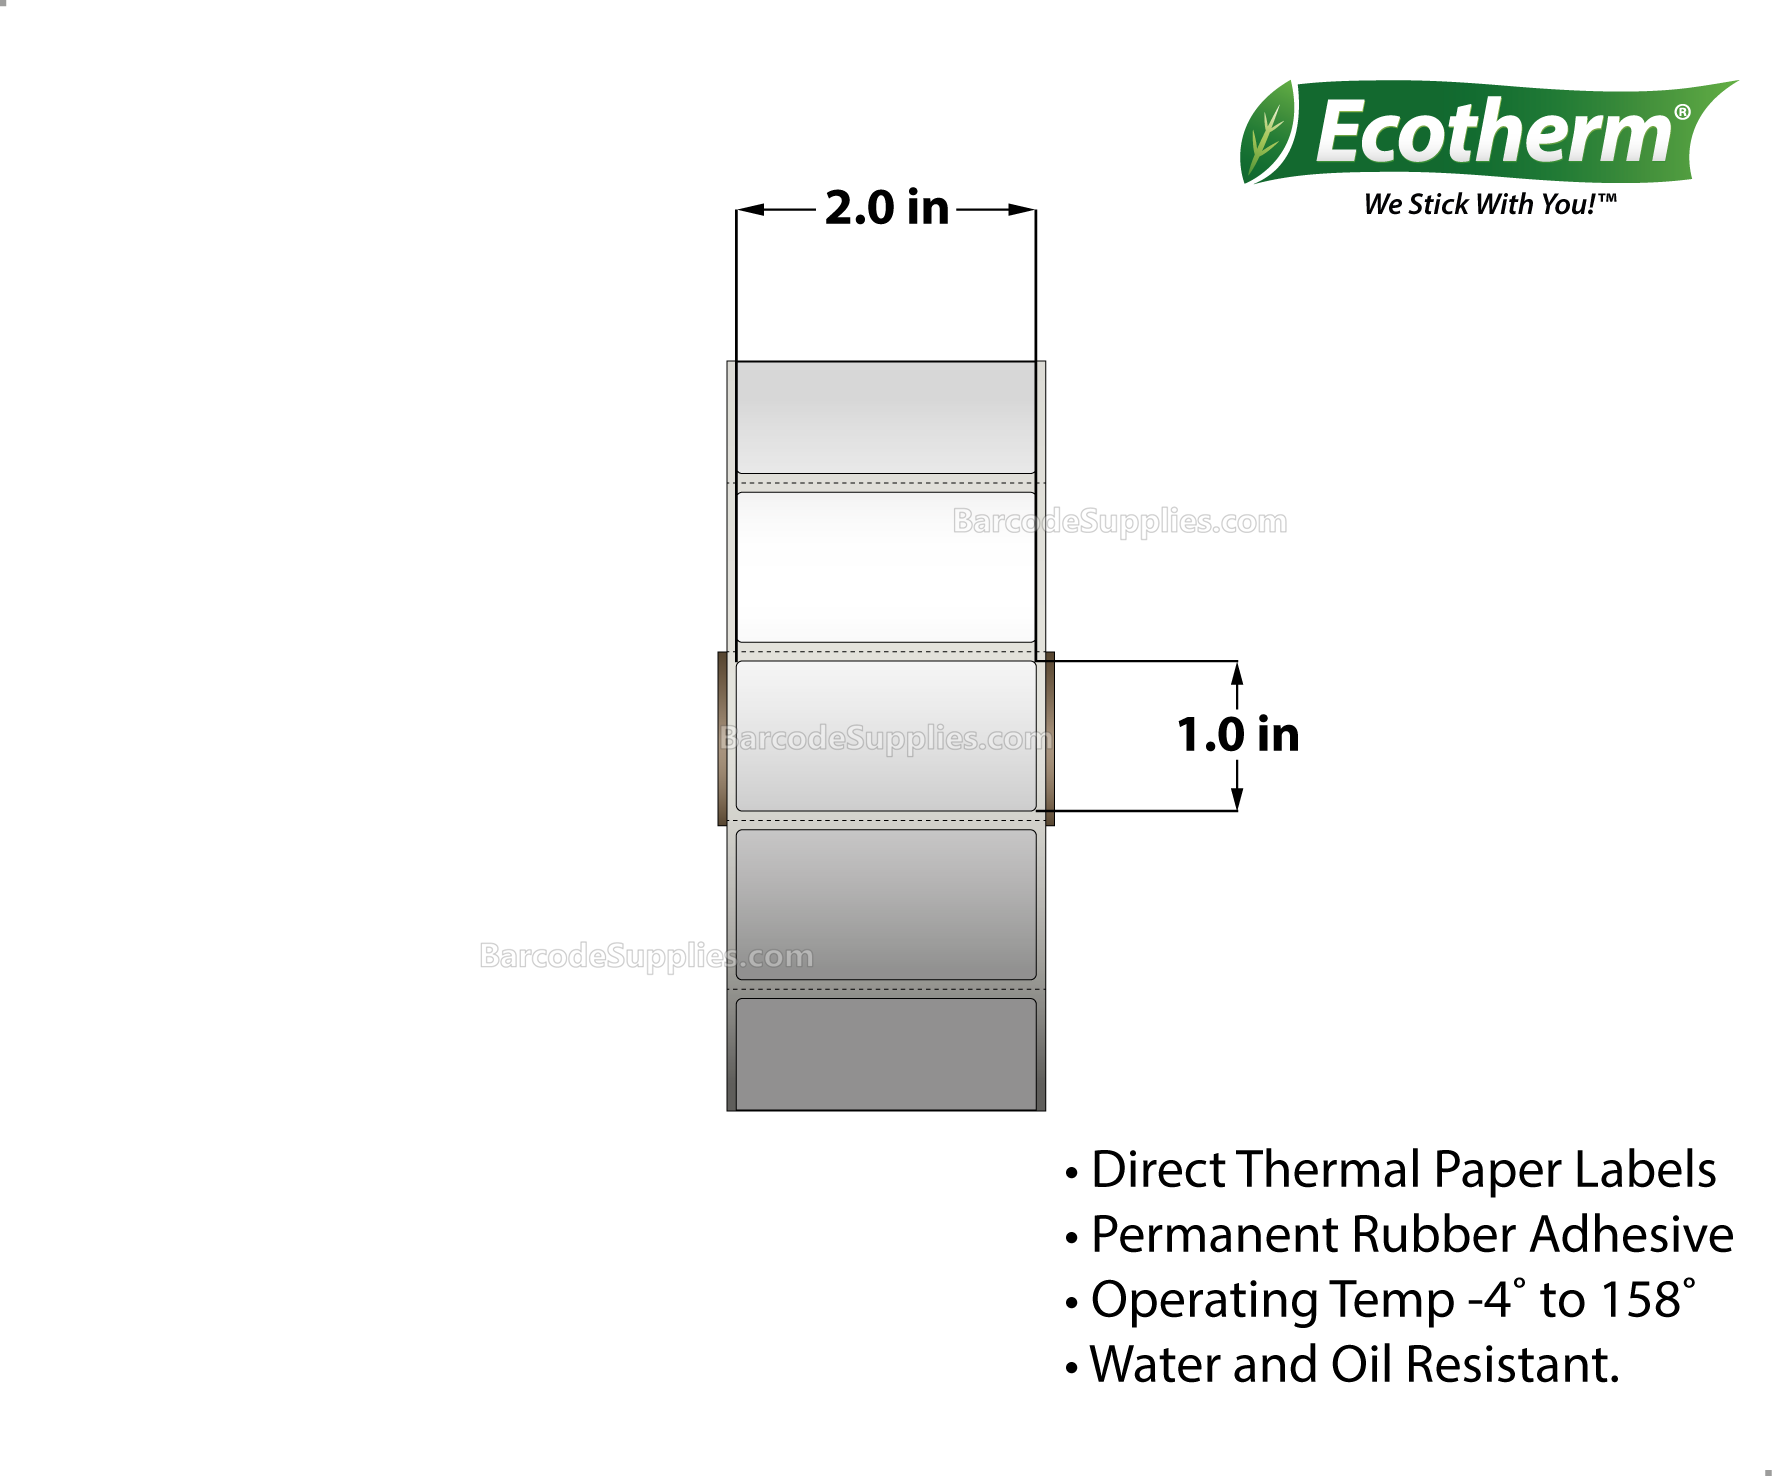 2 x 1 Direct Thermal White Labels With Rubber Adhesive - Perforated - 2500 Labels Per Roll - Carton Of 6 Rolls - 15000 Labels Total - MPN: ECOTHERM15118-6